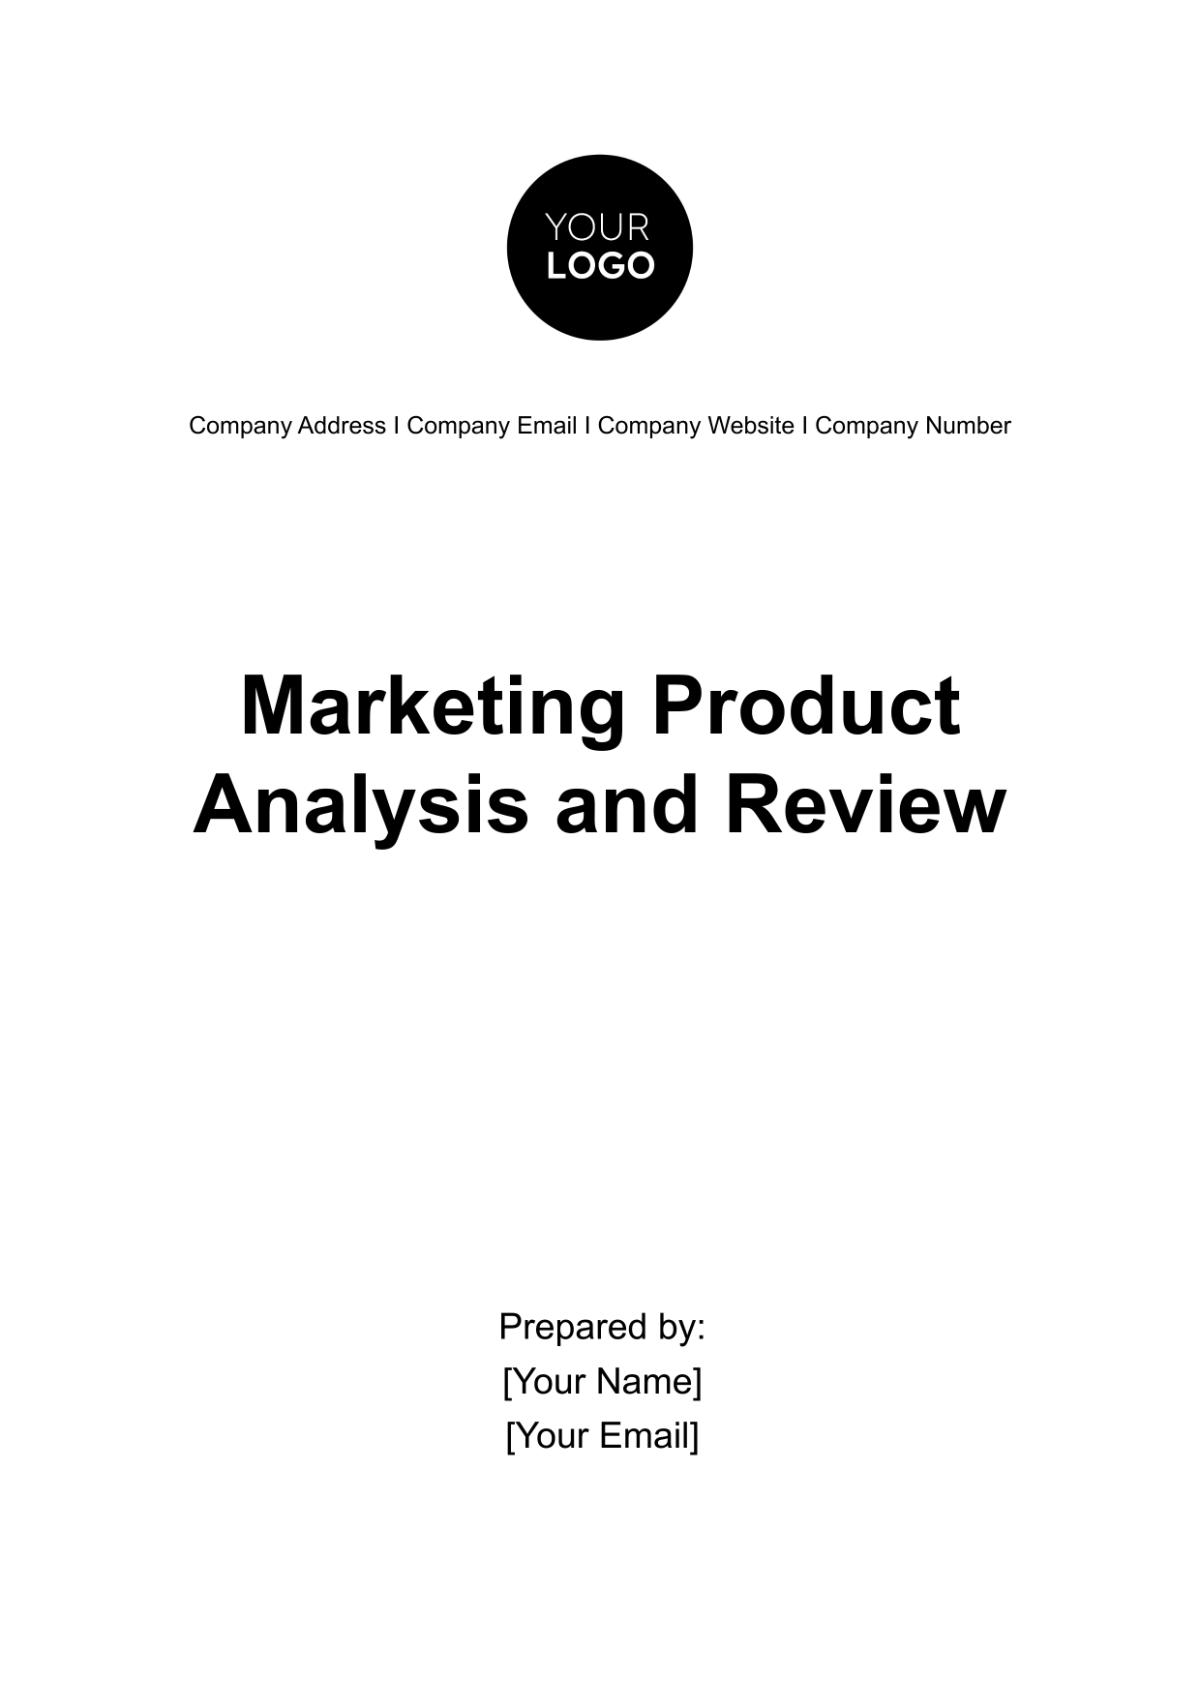 Marketing Product Analysis and Review Template